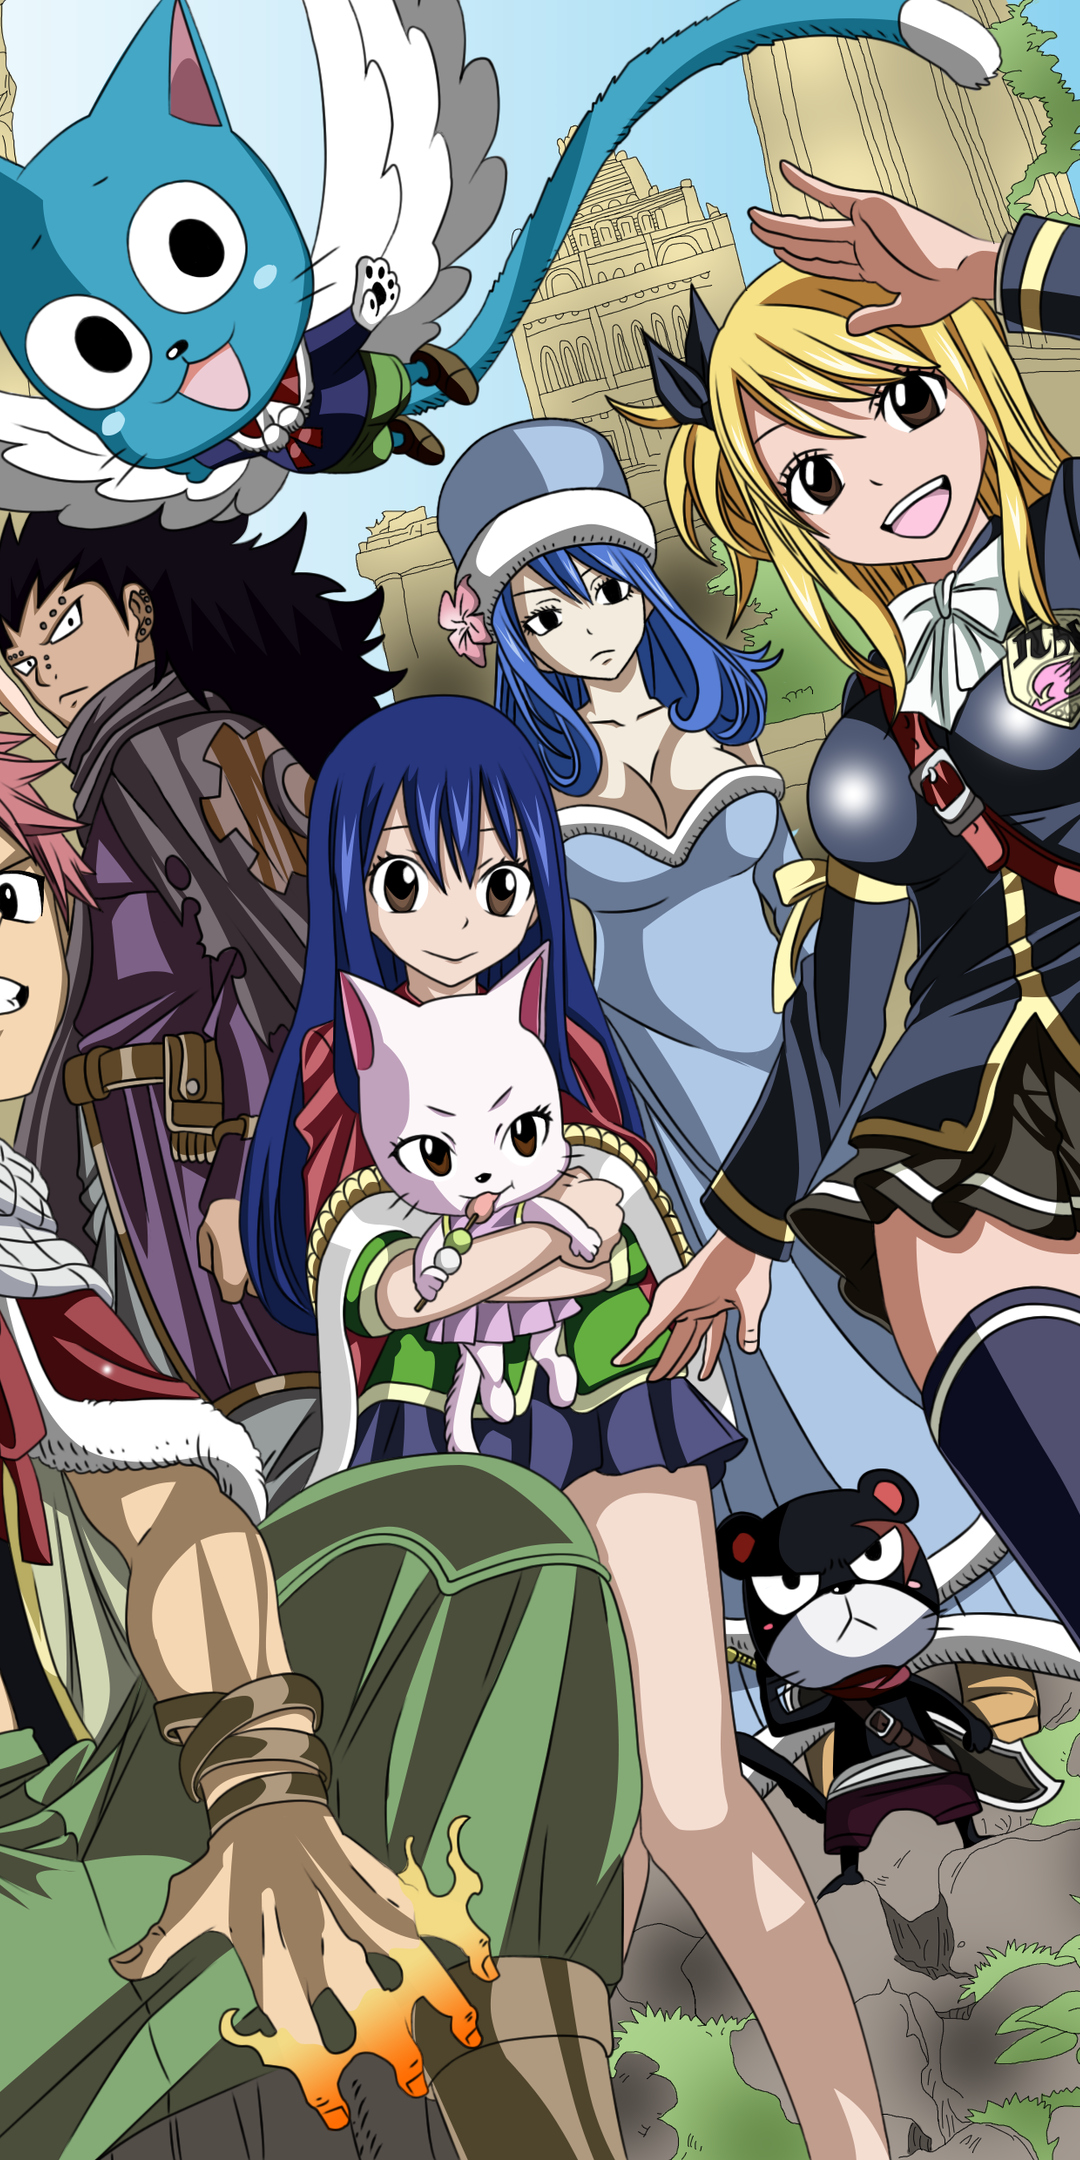 Download Anime Fairy Tail Natsu and All Characters, Anime, Fairy, Tail,  Natsu, All, Characters Wallpaper in 1080x2160 Resolution